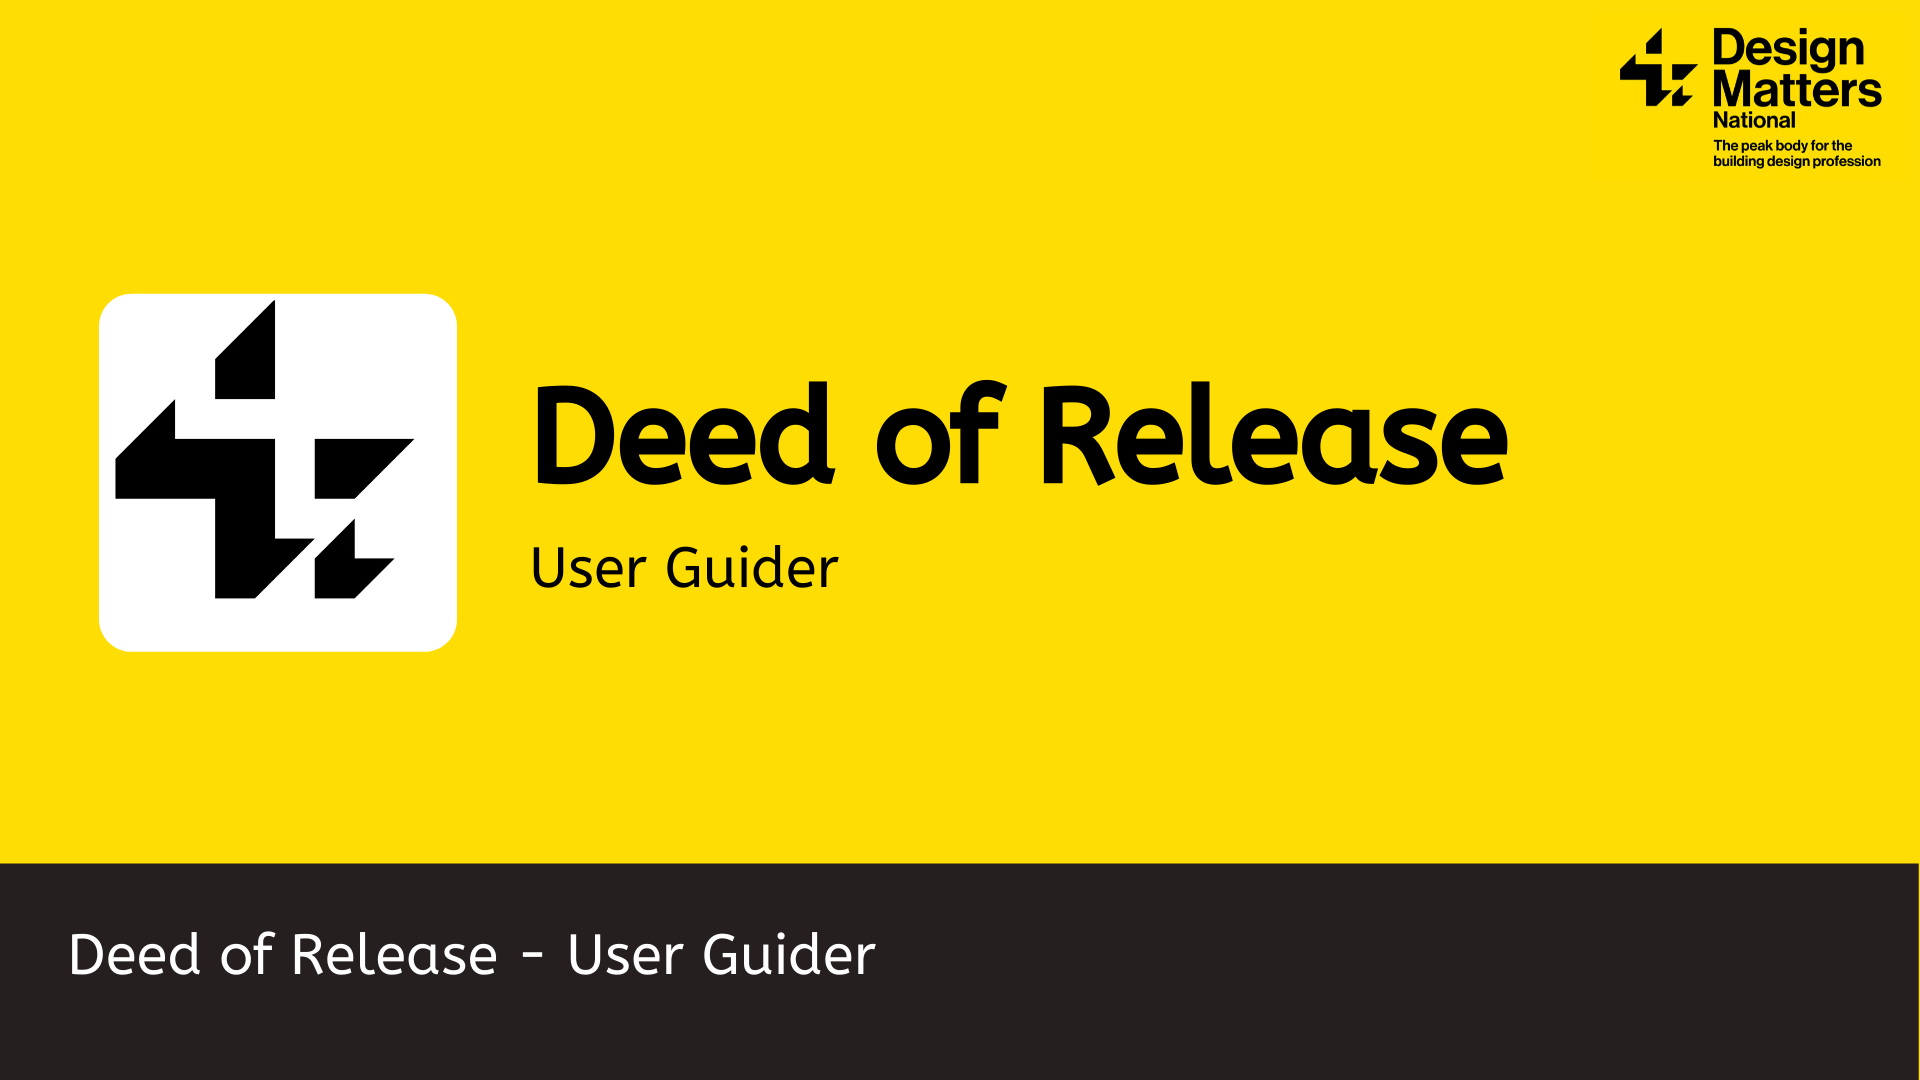 Deed of Release CAD files and User Guide